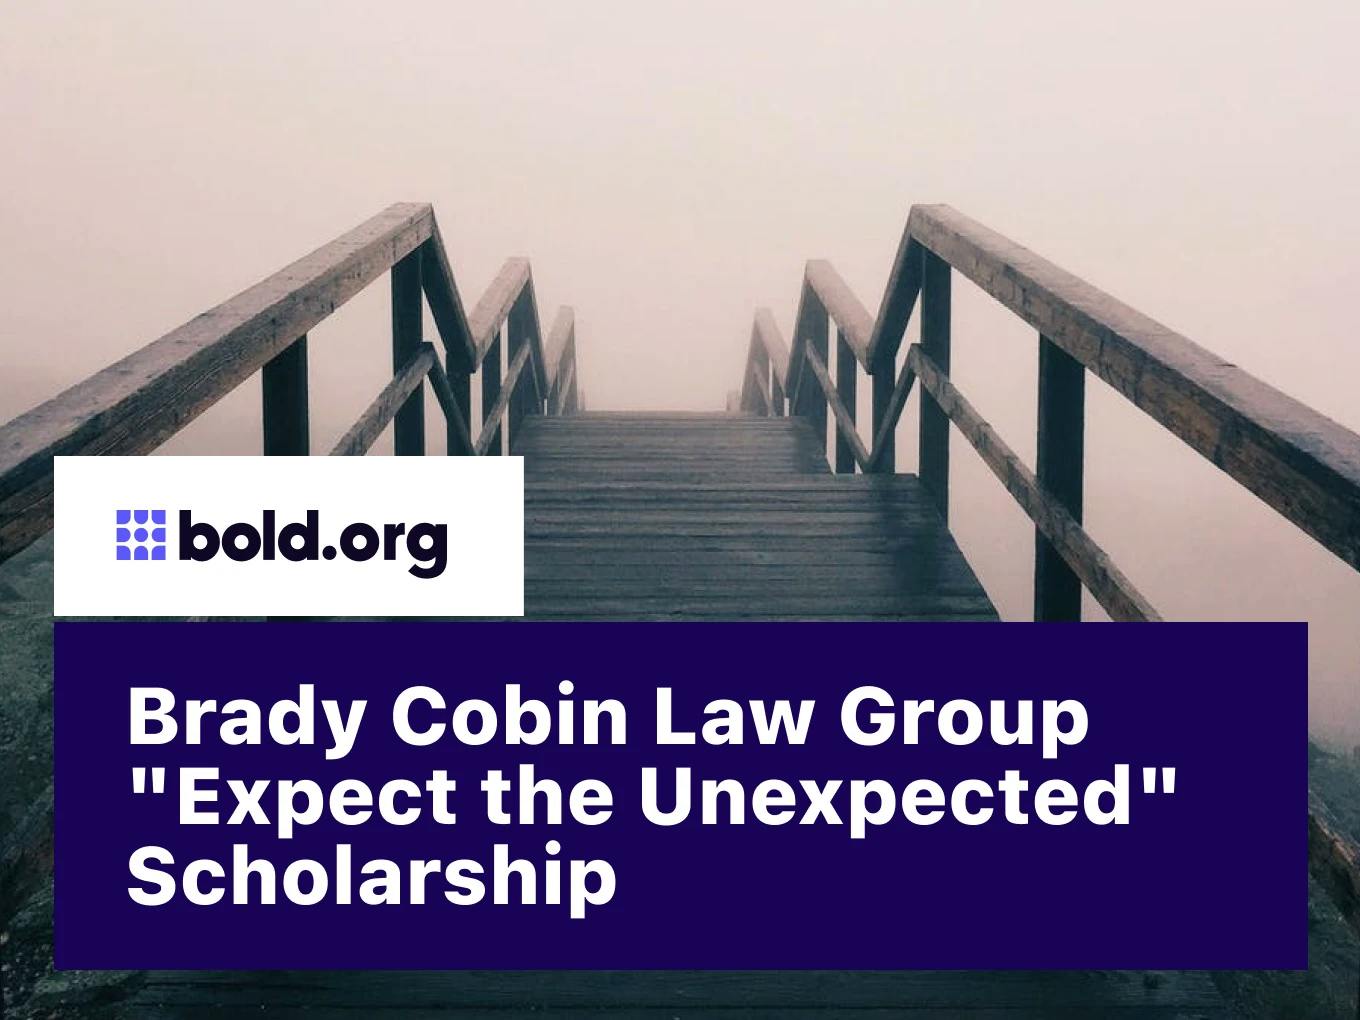 Brady Cobin Law Group "Expect the Unexpected" Scholarship